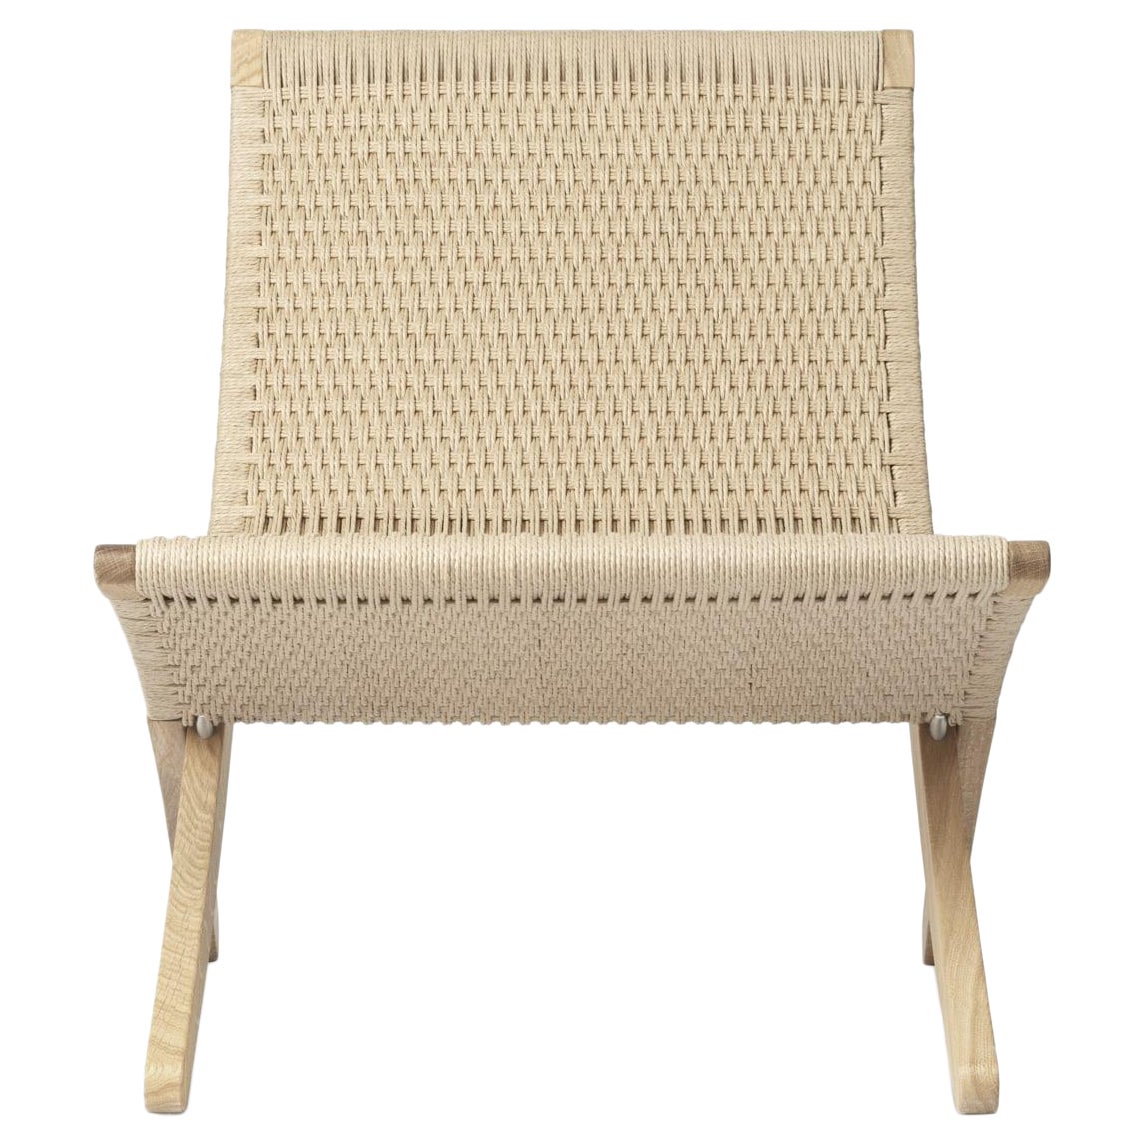 MG501 Cuba Chair in Oak Soap Finish Wood Frame with Natural Papercord Seat For Sale